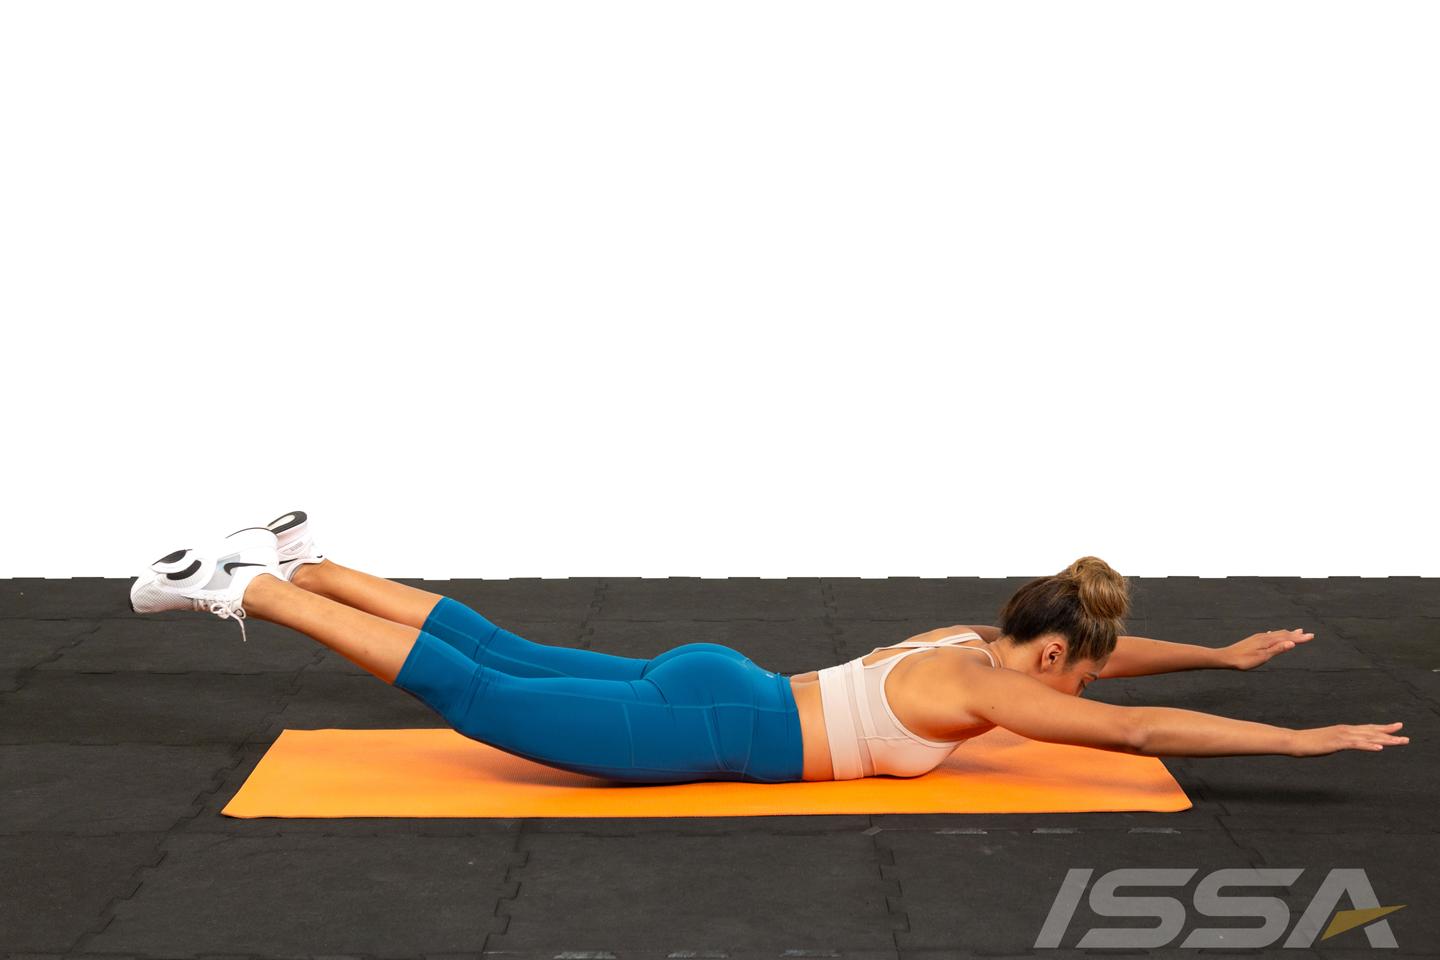  ISSA, International Sports Sciences Association, Certified Personal Trainer, ISSAonline, Best Exercises to Strengthen and Stretch Your Lats at Home, Superman